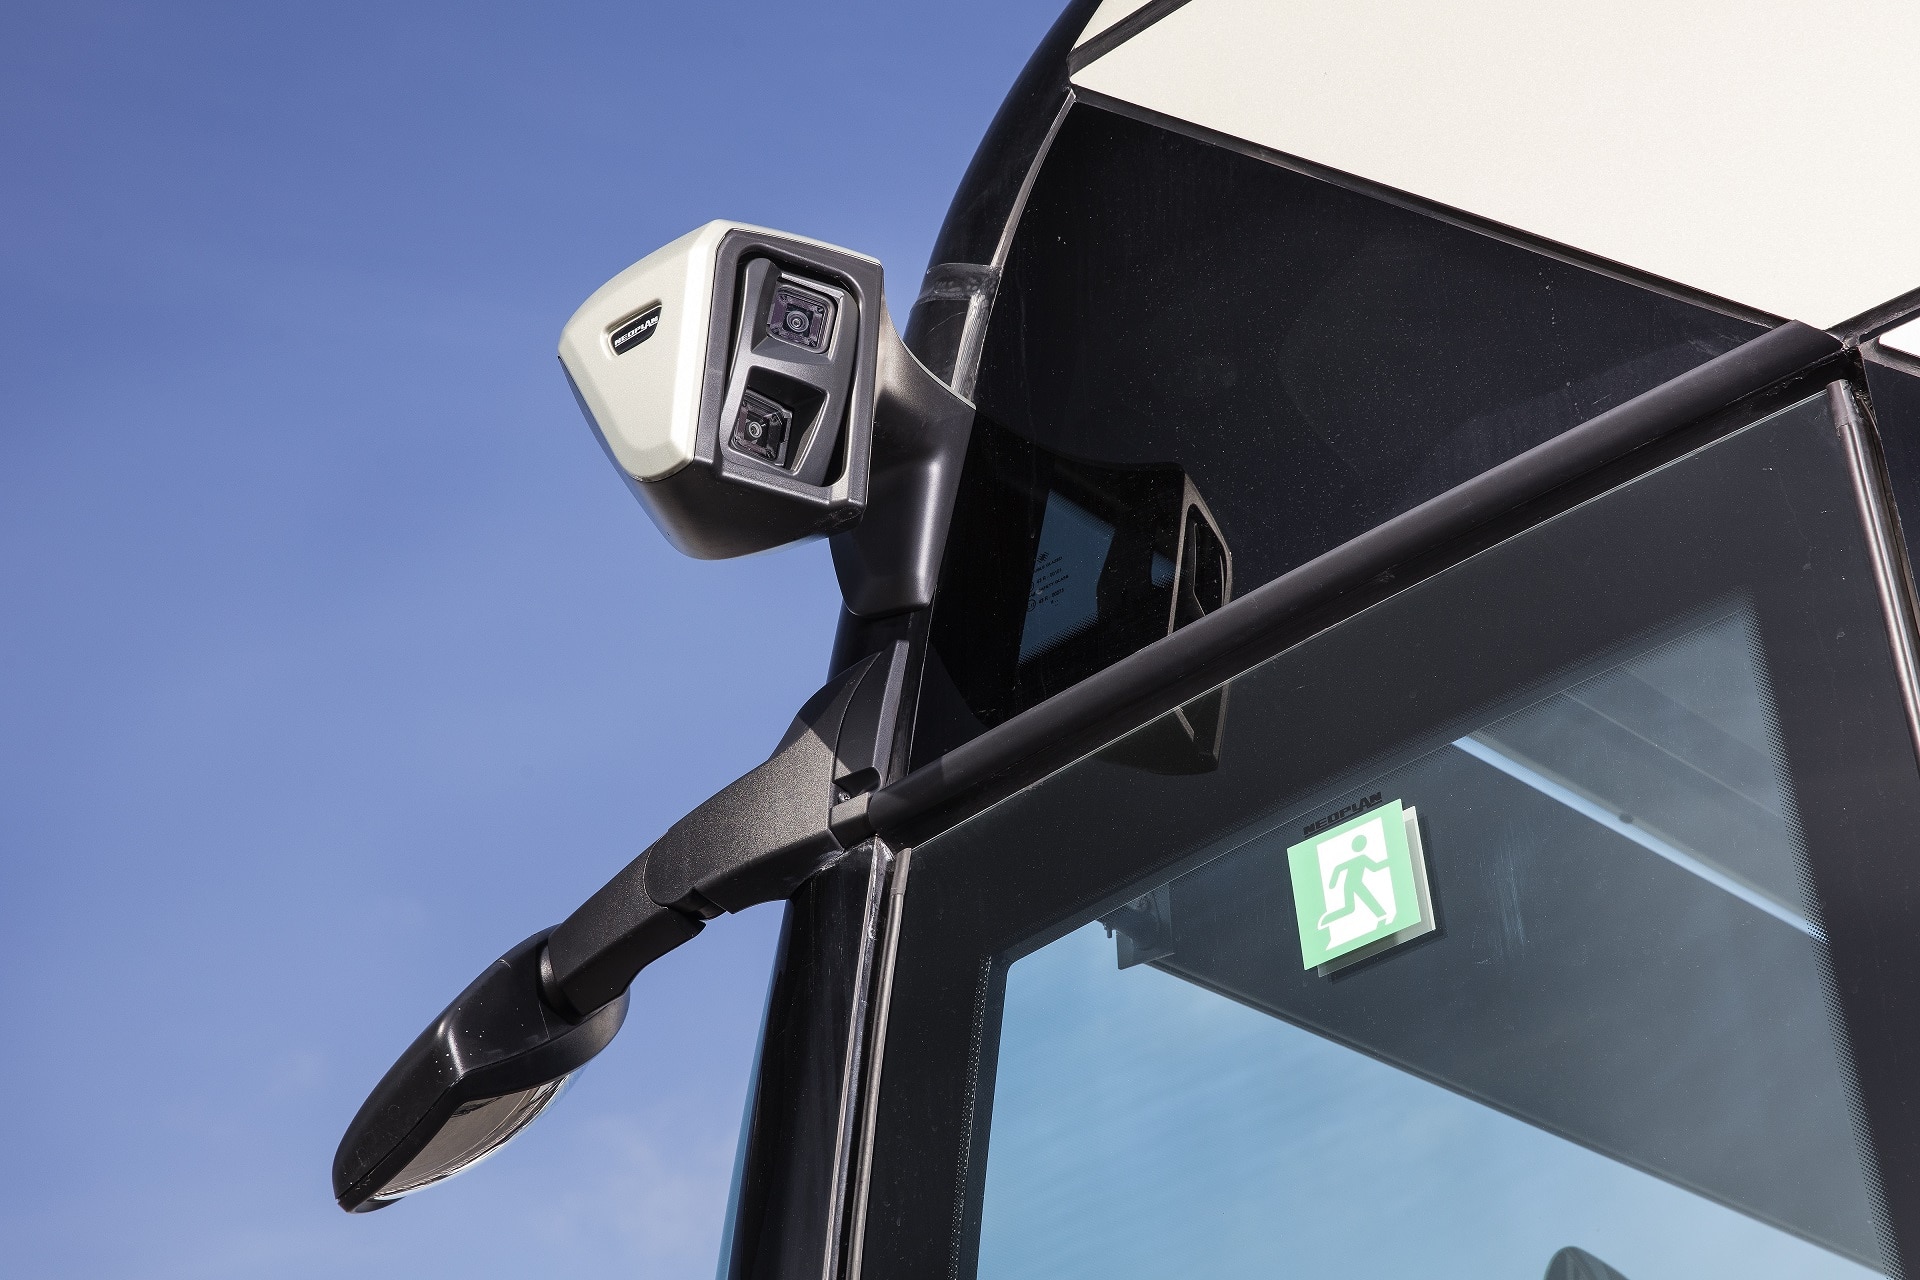 MAN OptiView cameras affixed to a Neoplan Tourliner